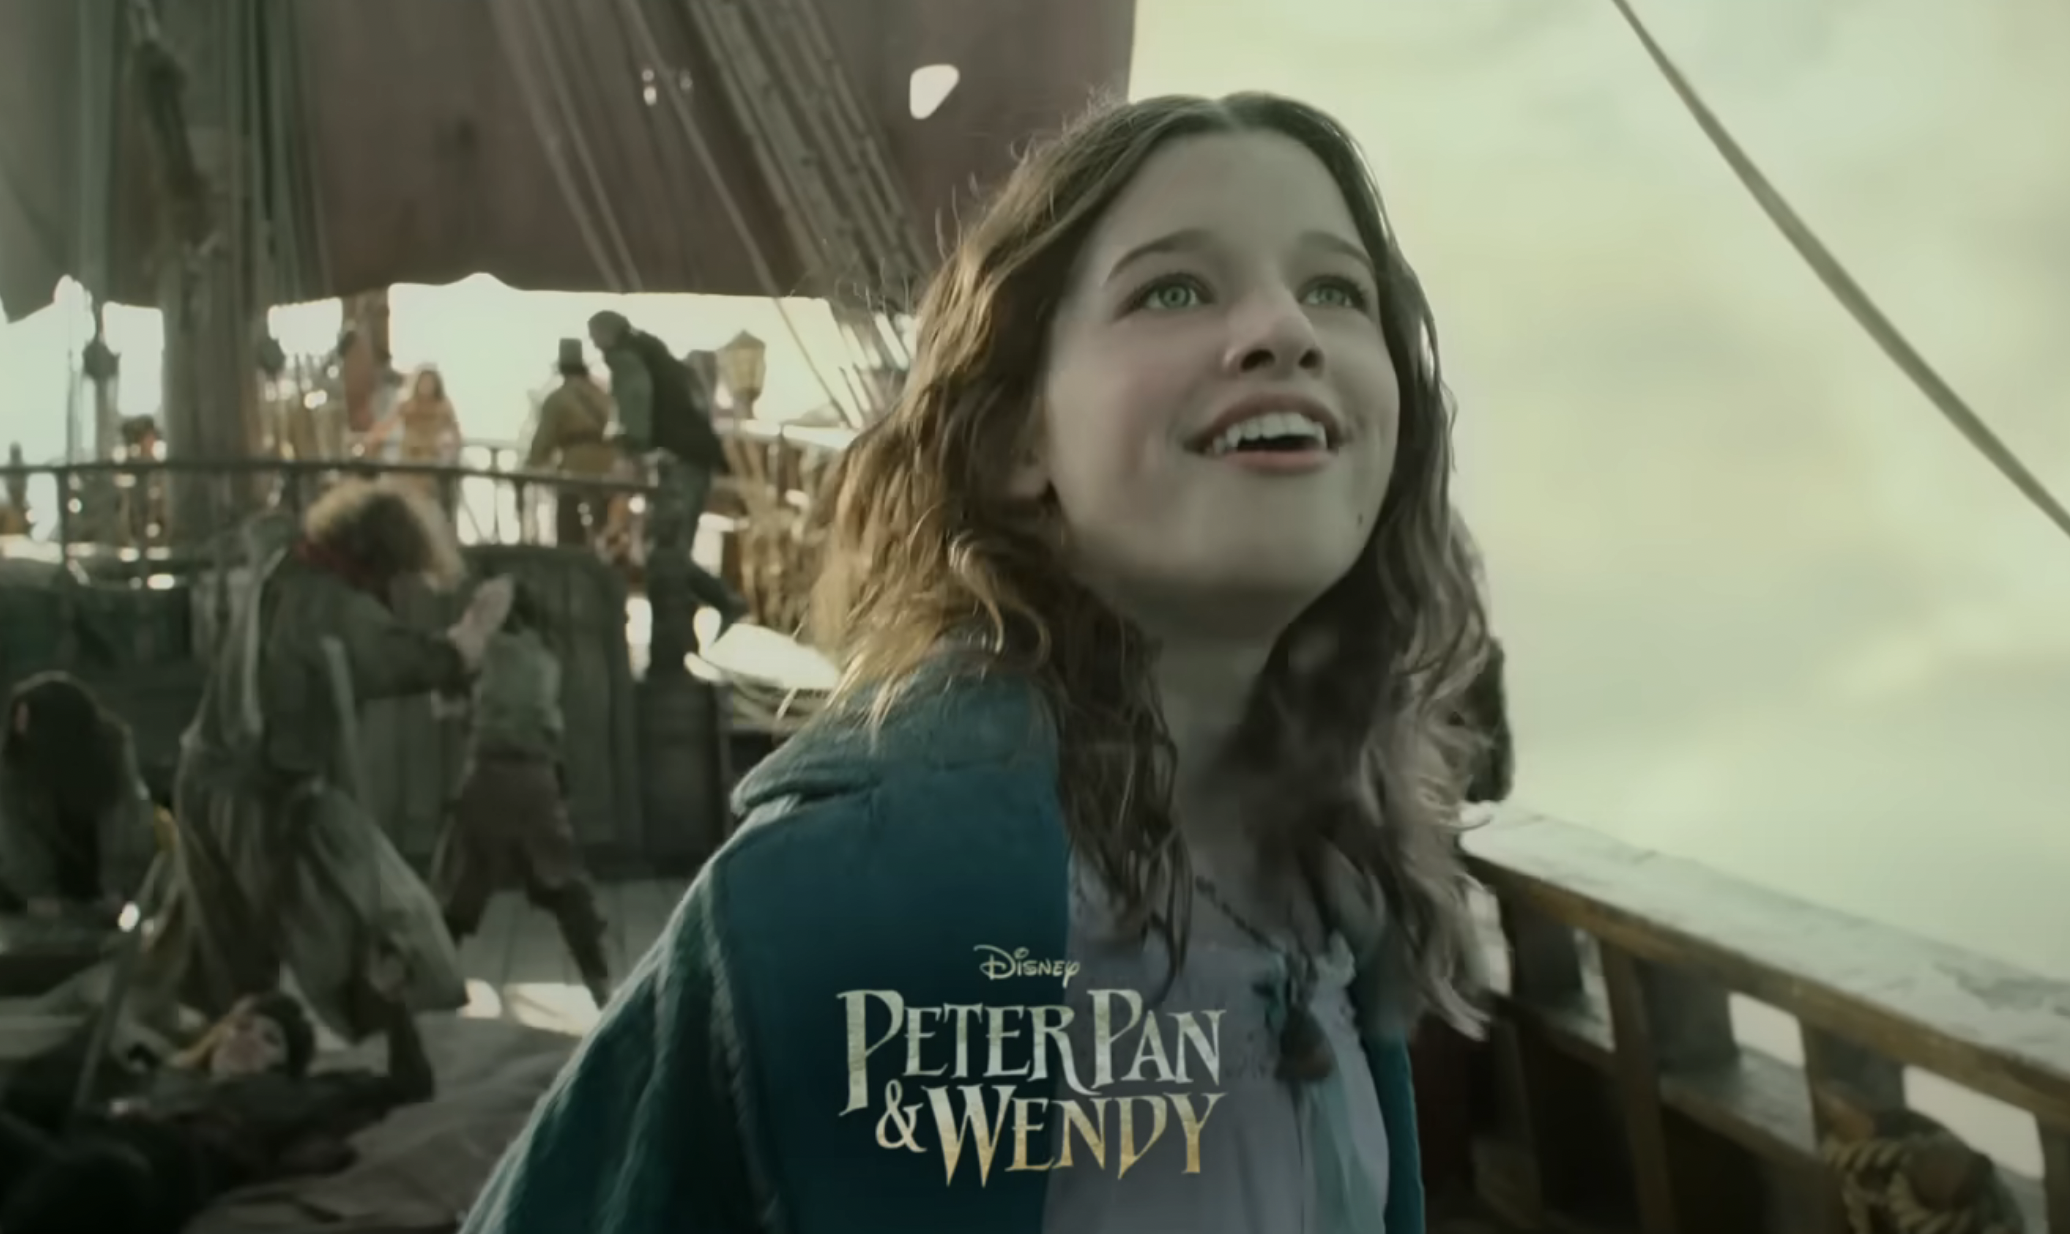 Why You Should Be Excited For ‘Peter Pan & Wendy’